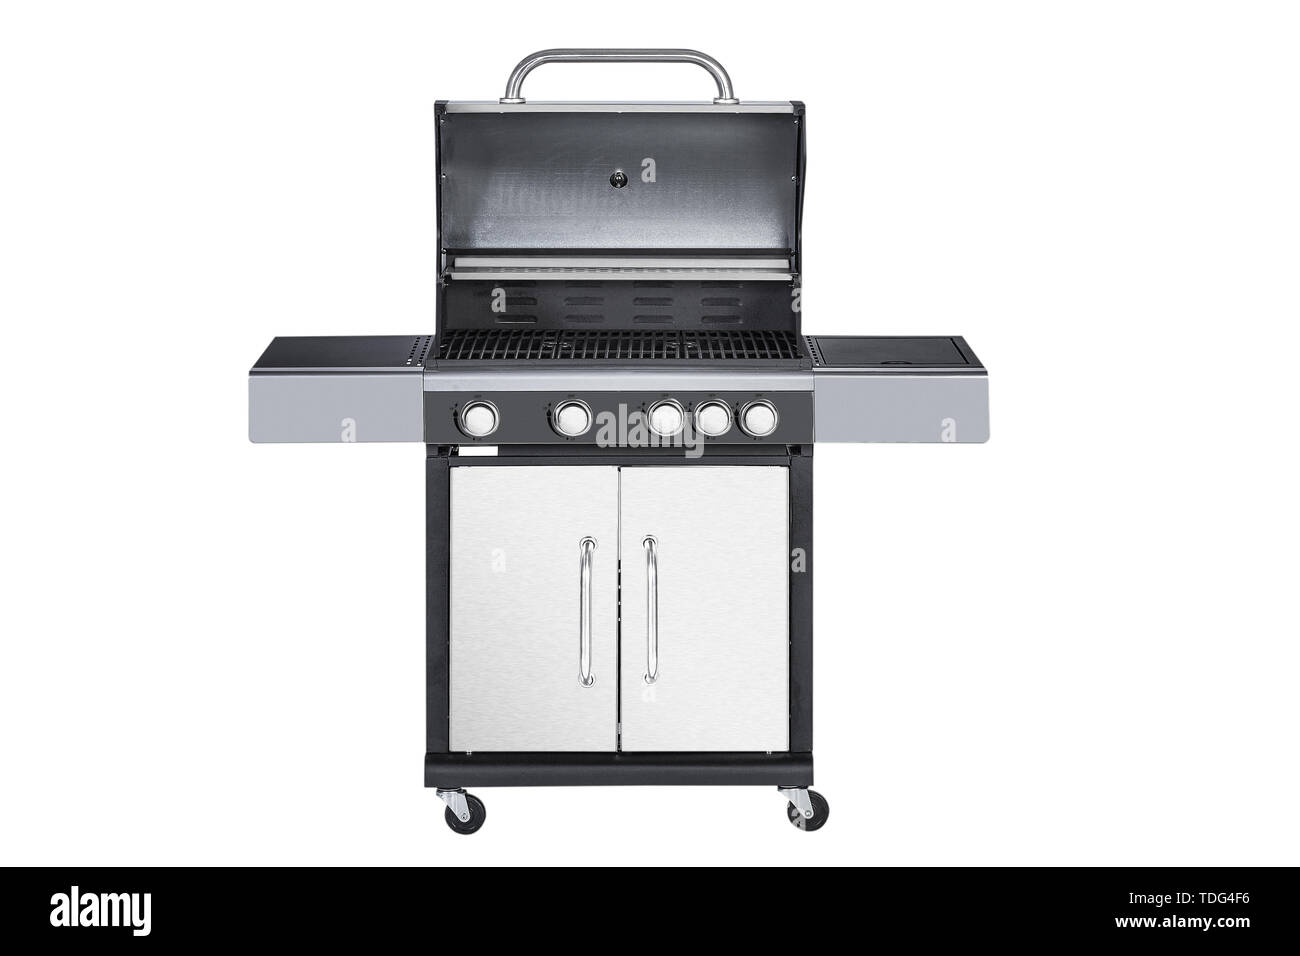 Stainless steel grill Stock Photo